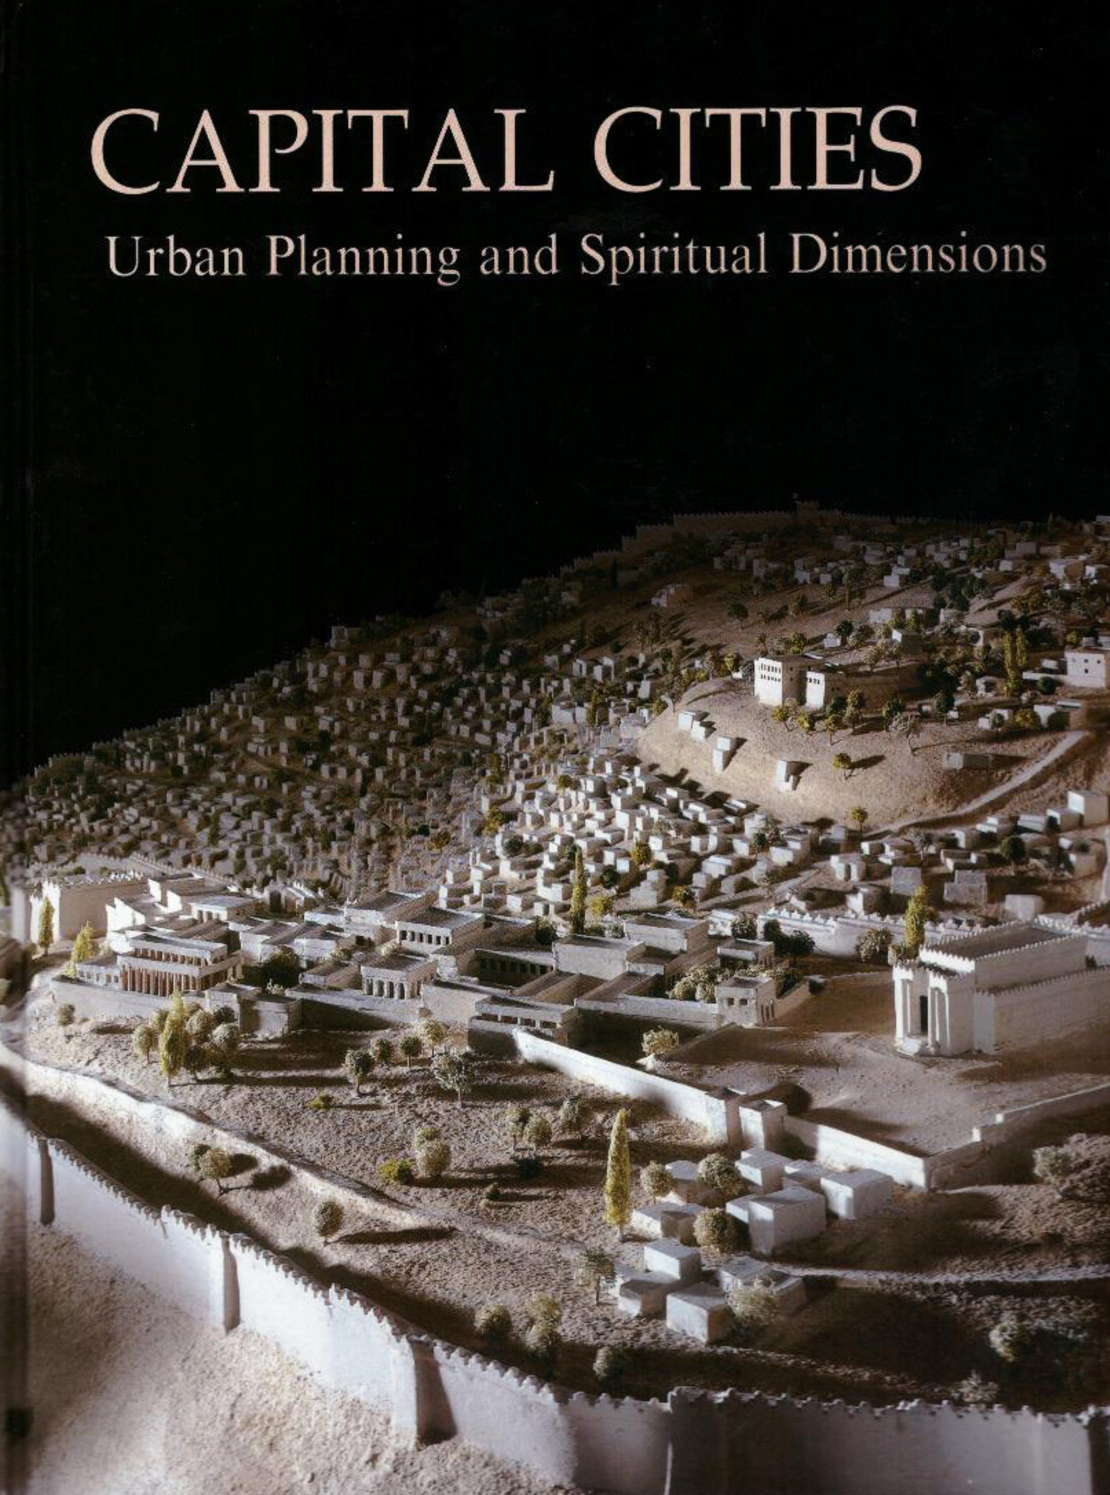 Capital Cities - Urban Planning and Spiritual Dimensions